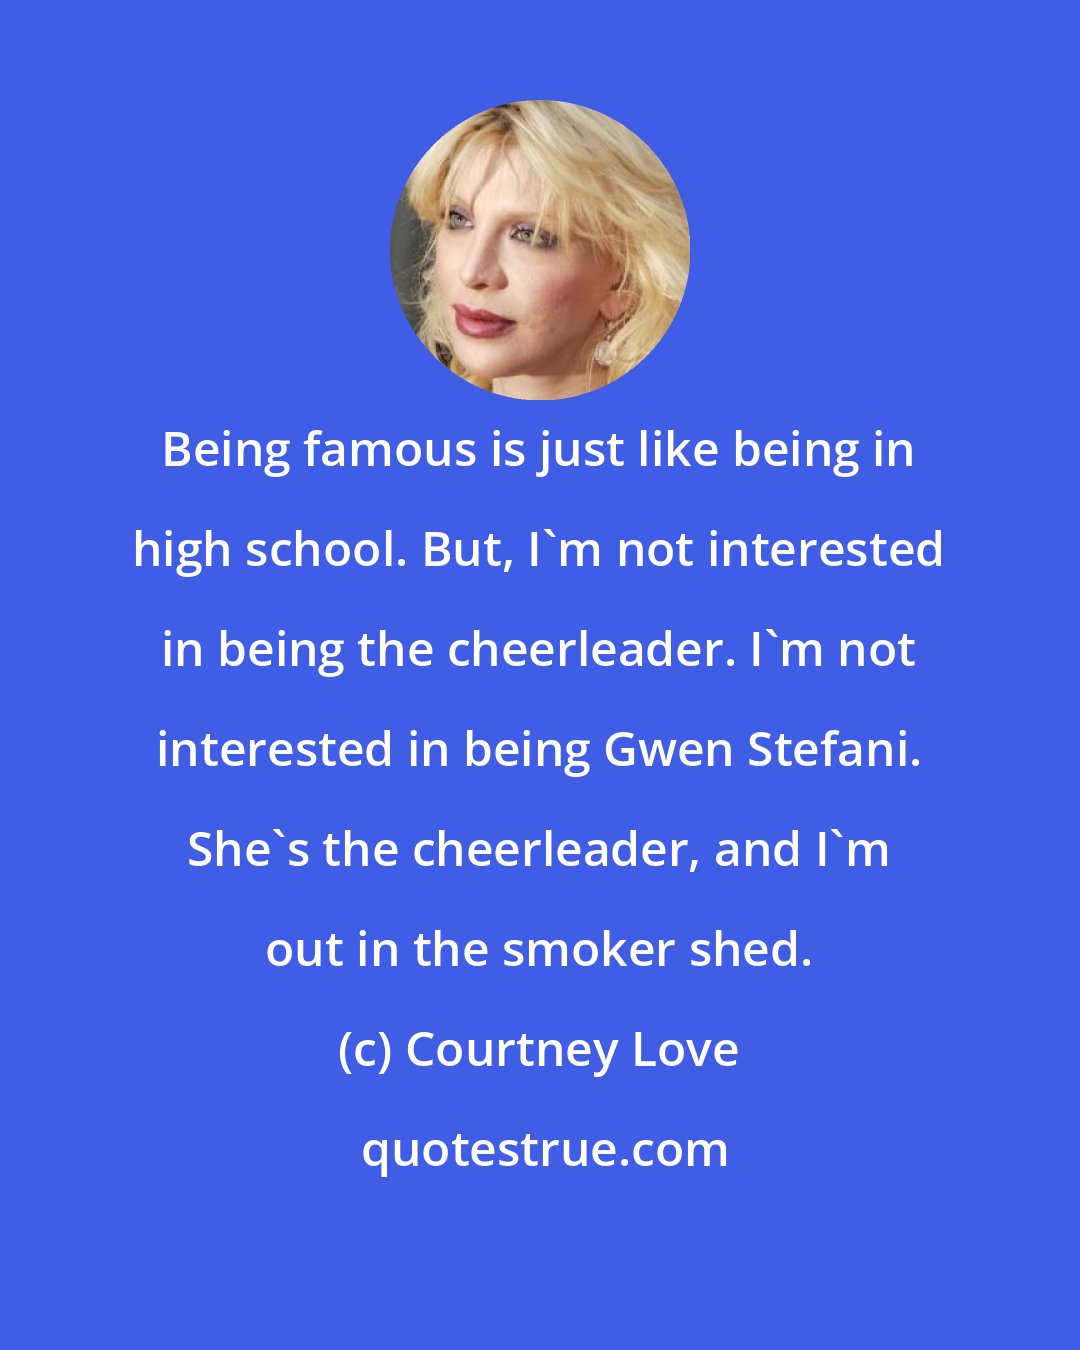 Courtney Love: Being famous is just like being in high school. But, I'm not interested in being the cheerleader. I'm not interested in being Gwen Stefani. She's the cheerleader, and I'm out in the smoker shed.